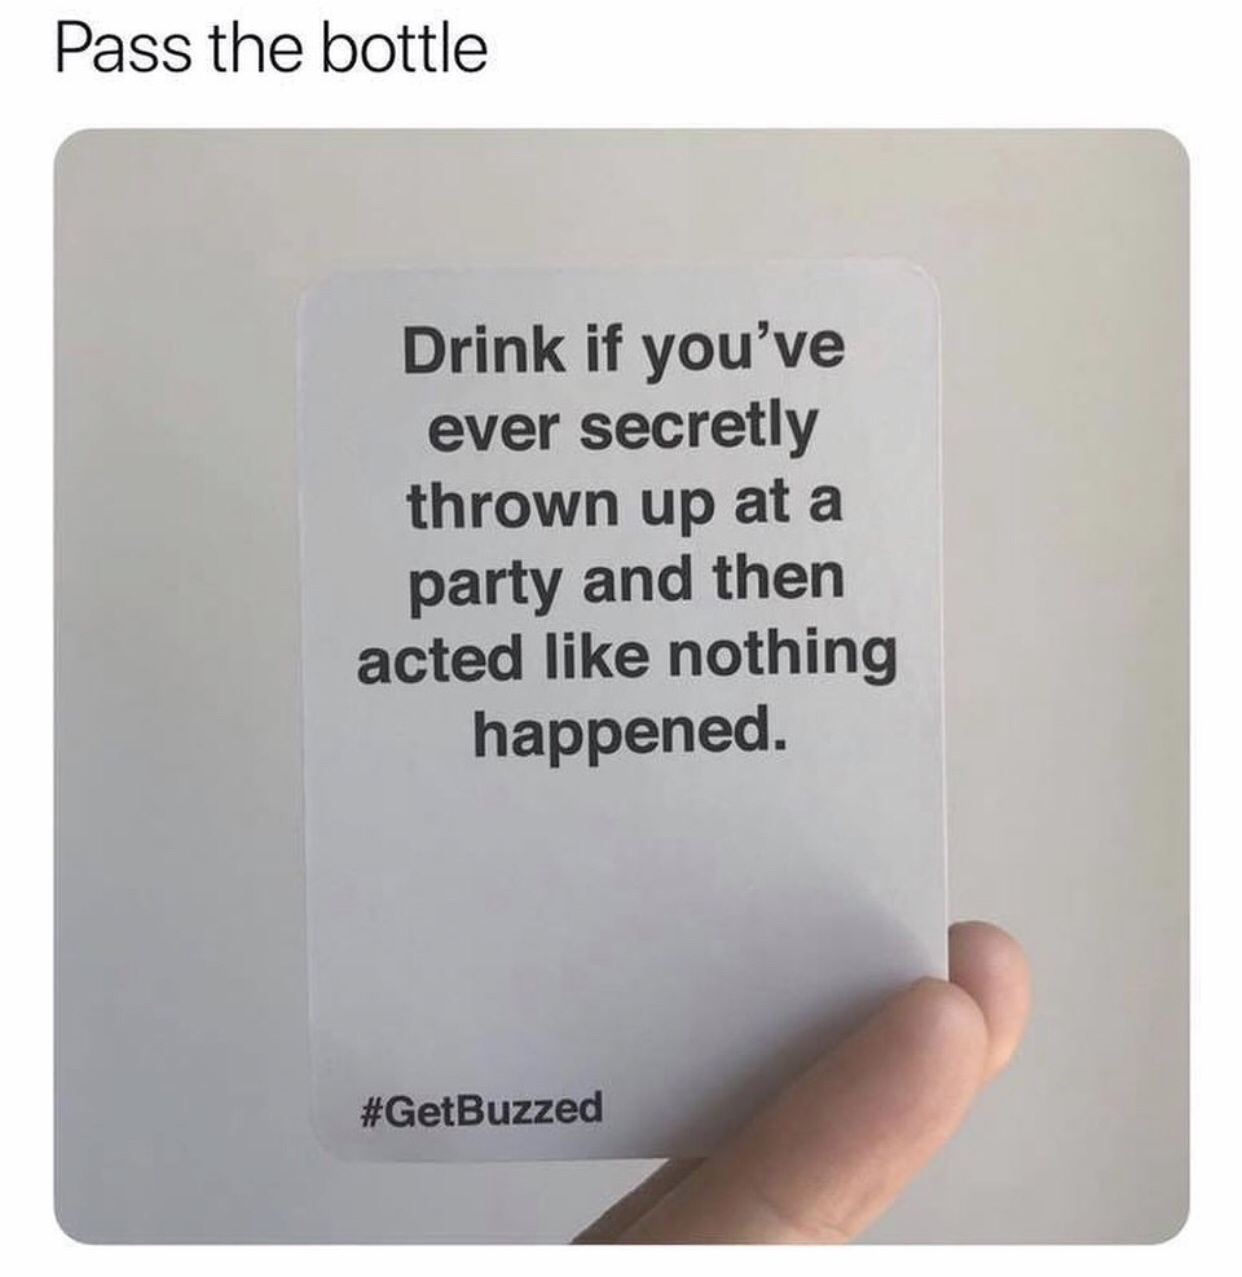 america's best warranty - Pass the bottle Drink if you've ever secretly thrown up at a party and then acted nothing happened.